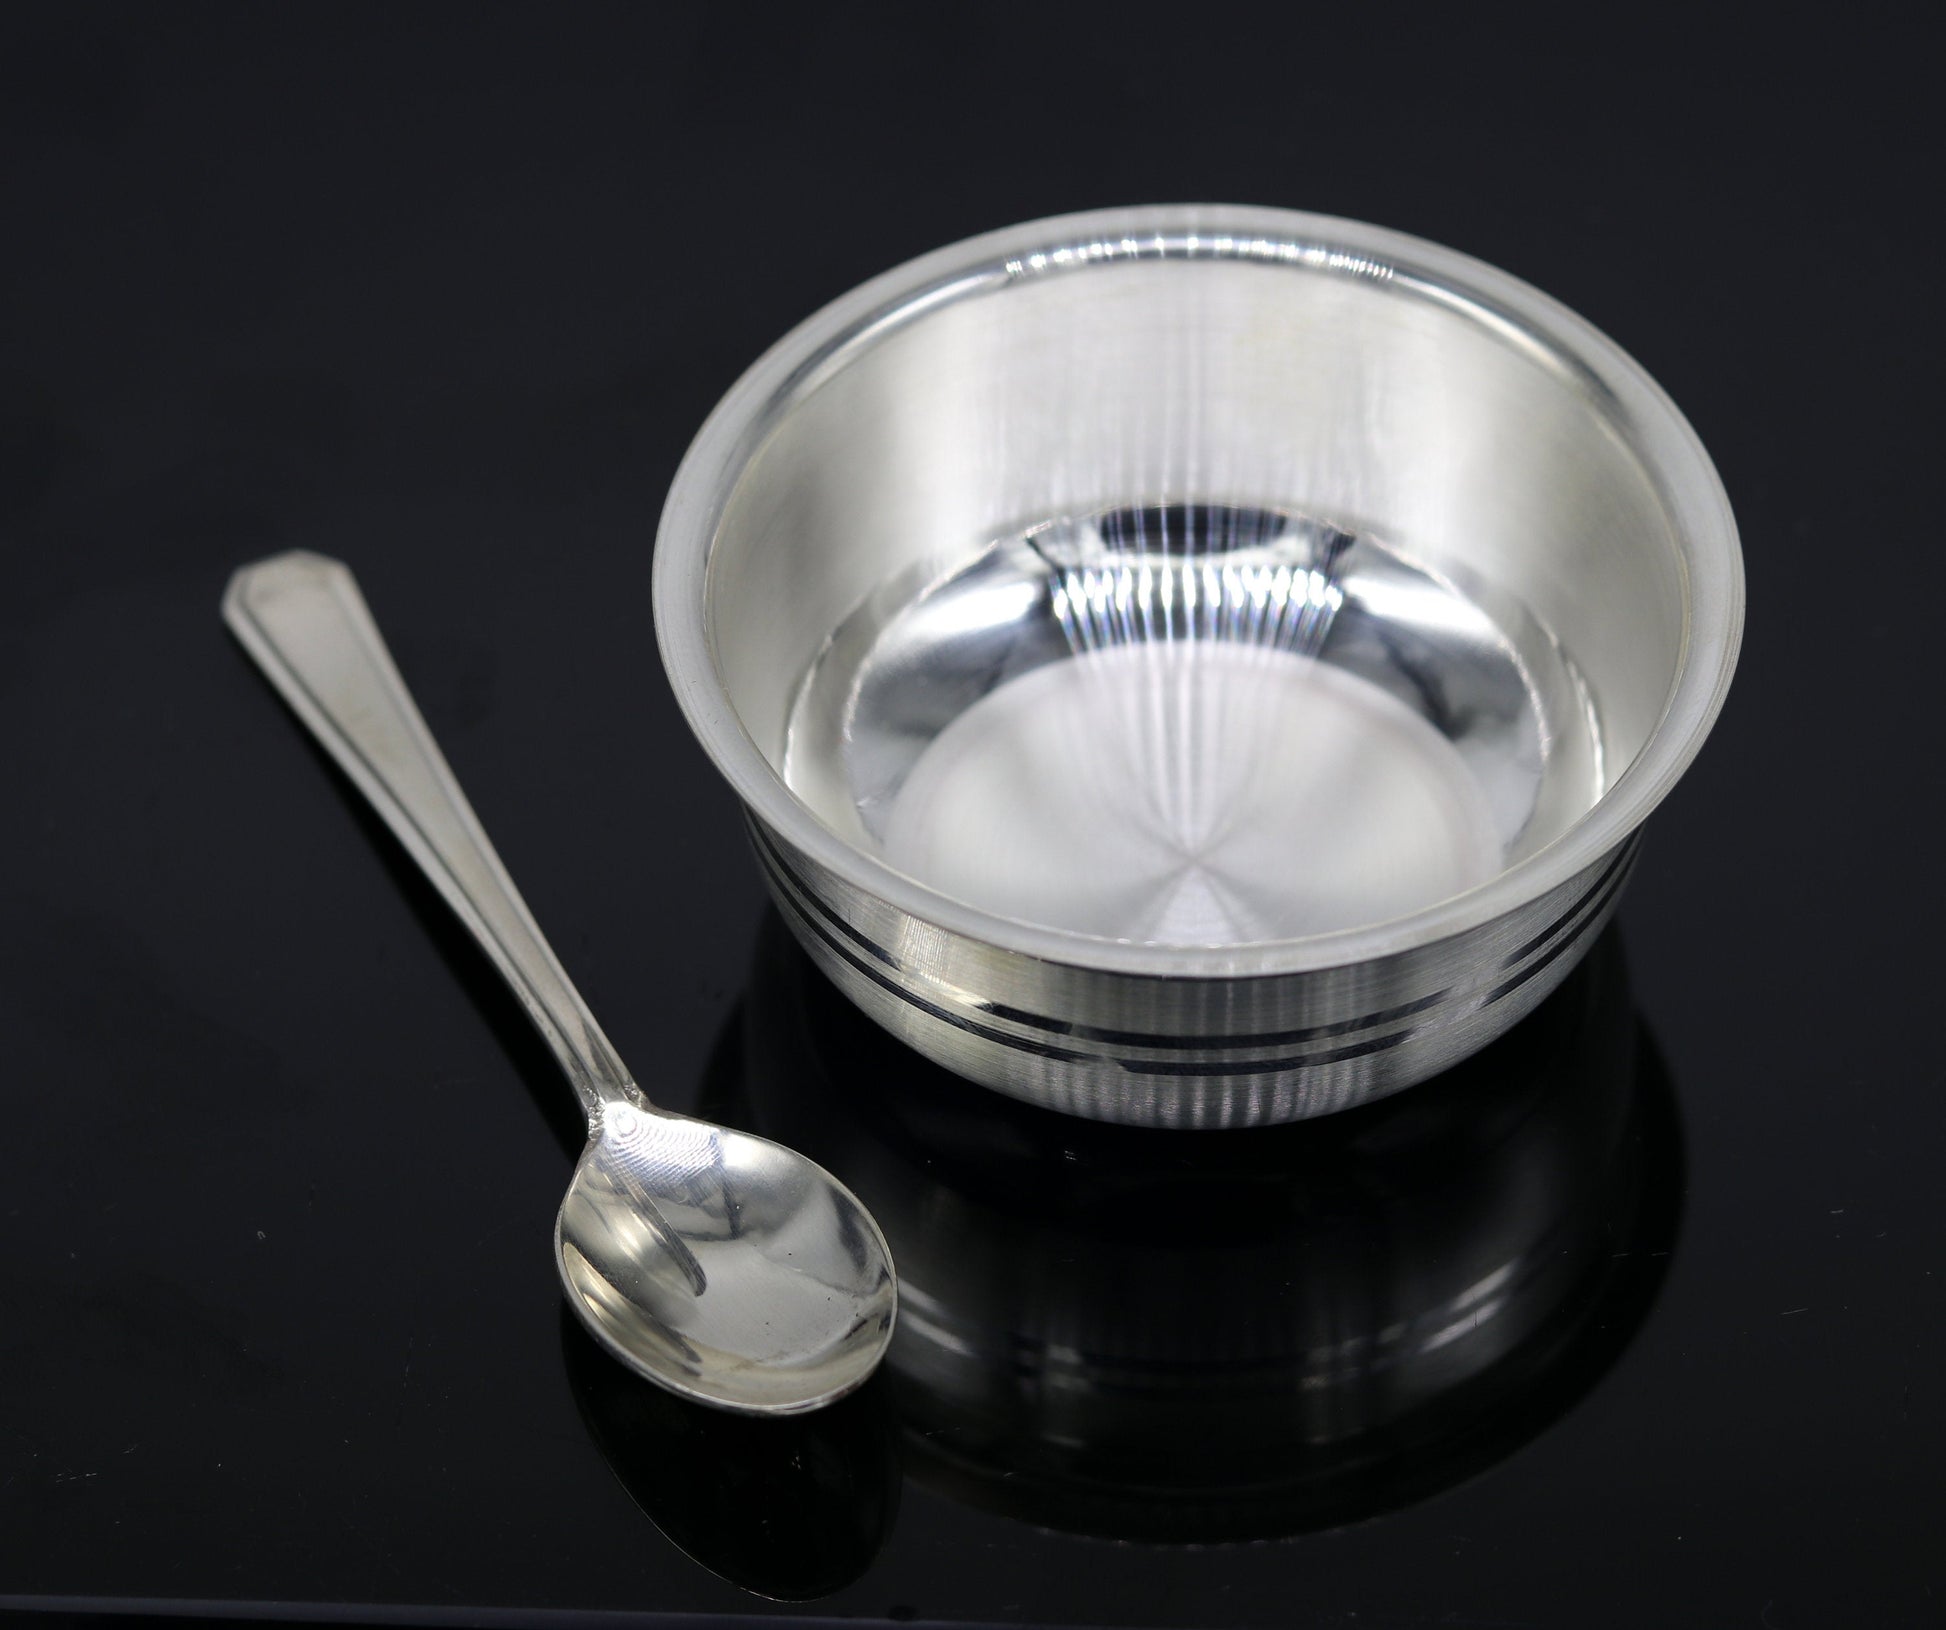 Pure 999 fine silver bowl and spoon, silver baby dinner set, baby utensils  sv43